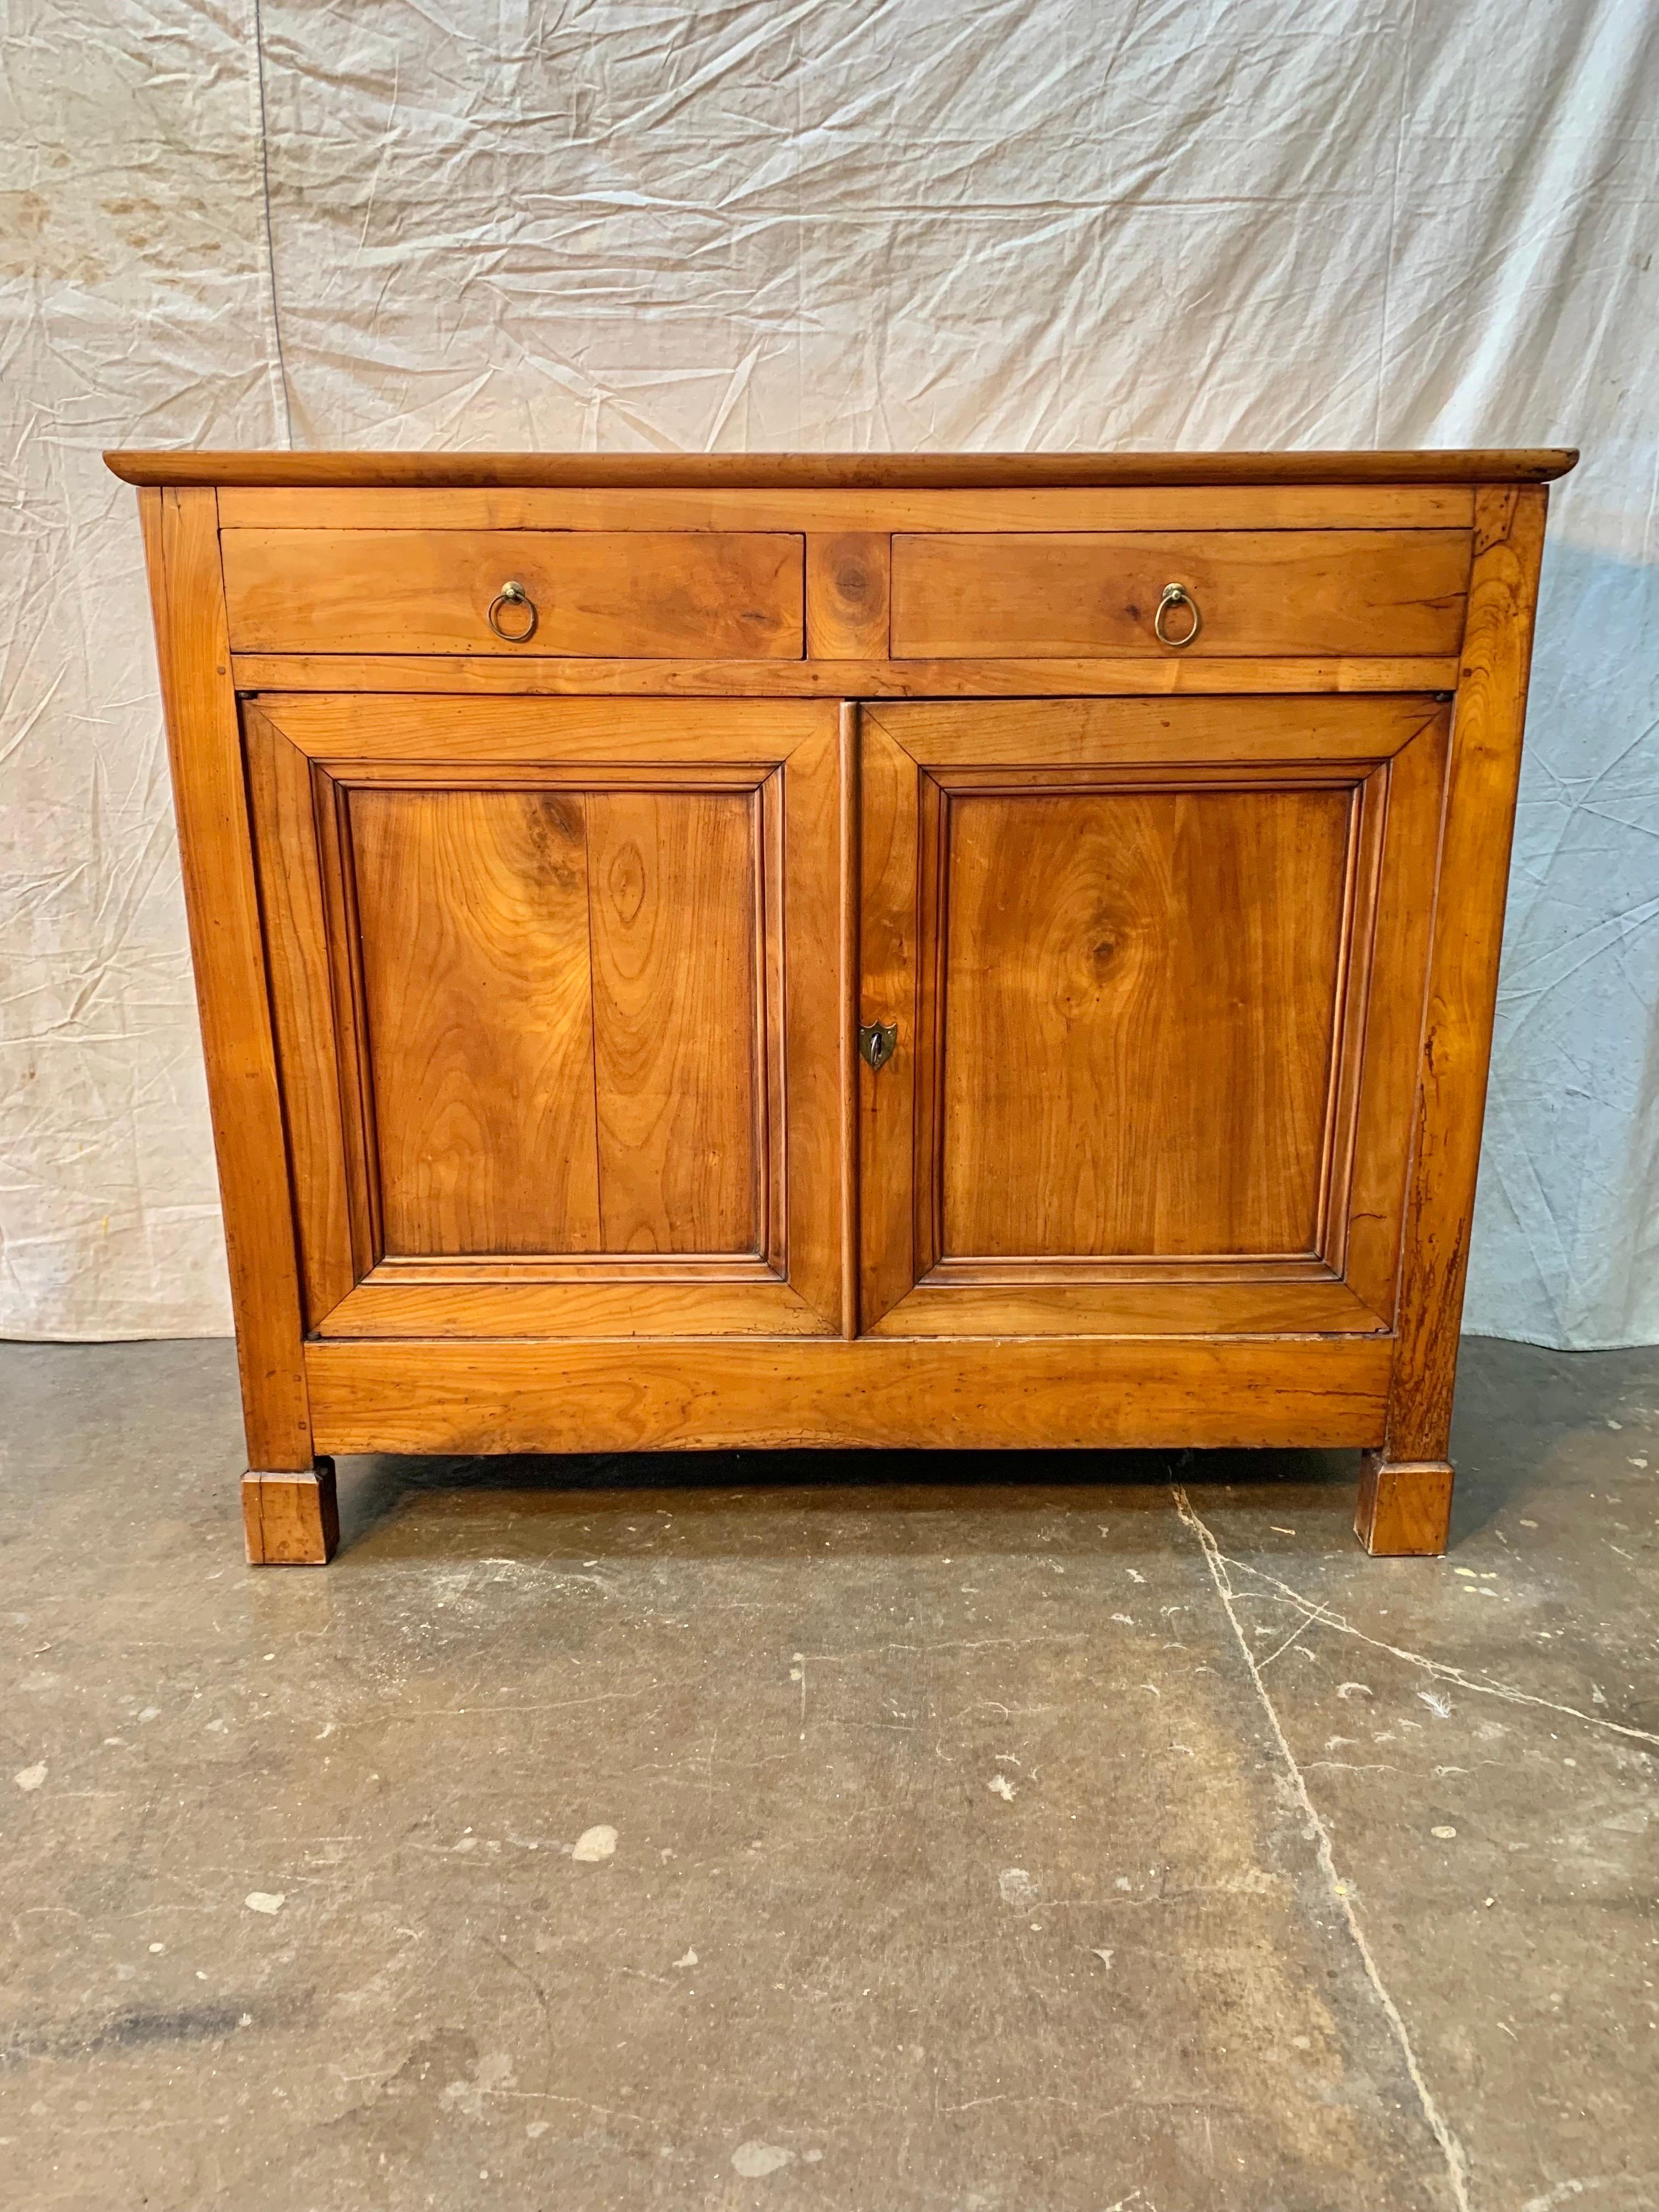 Found in the Pays de la Loire Region of France, this French Louis Philippe buffet or sideboard, was crafted from mixed wood consisting of old growth cherry and pine side panels. The mixed woods create a unique color variation to the piece. This